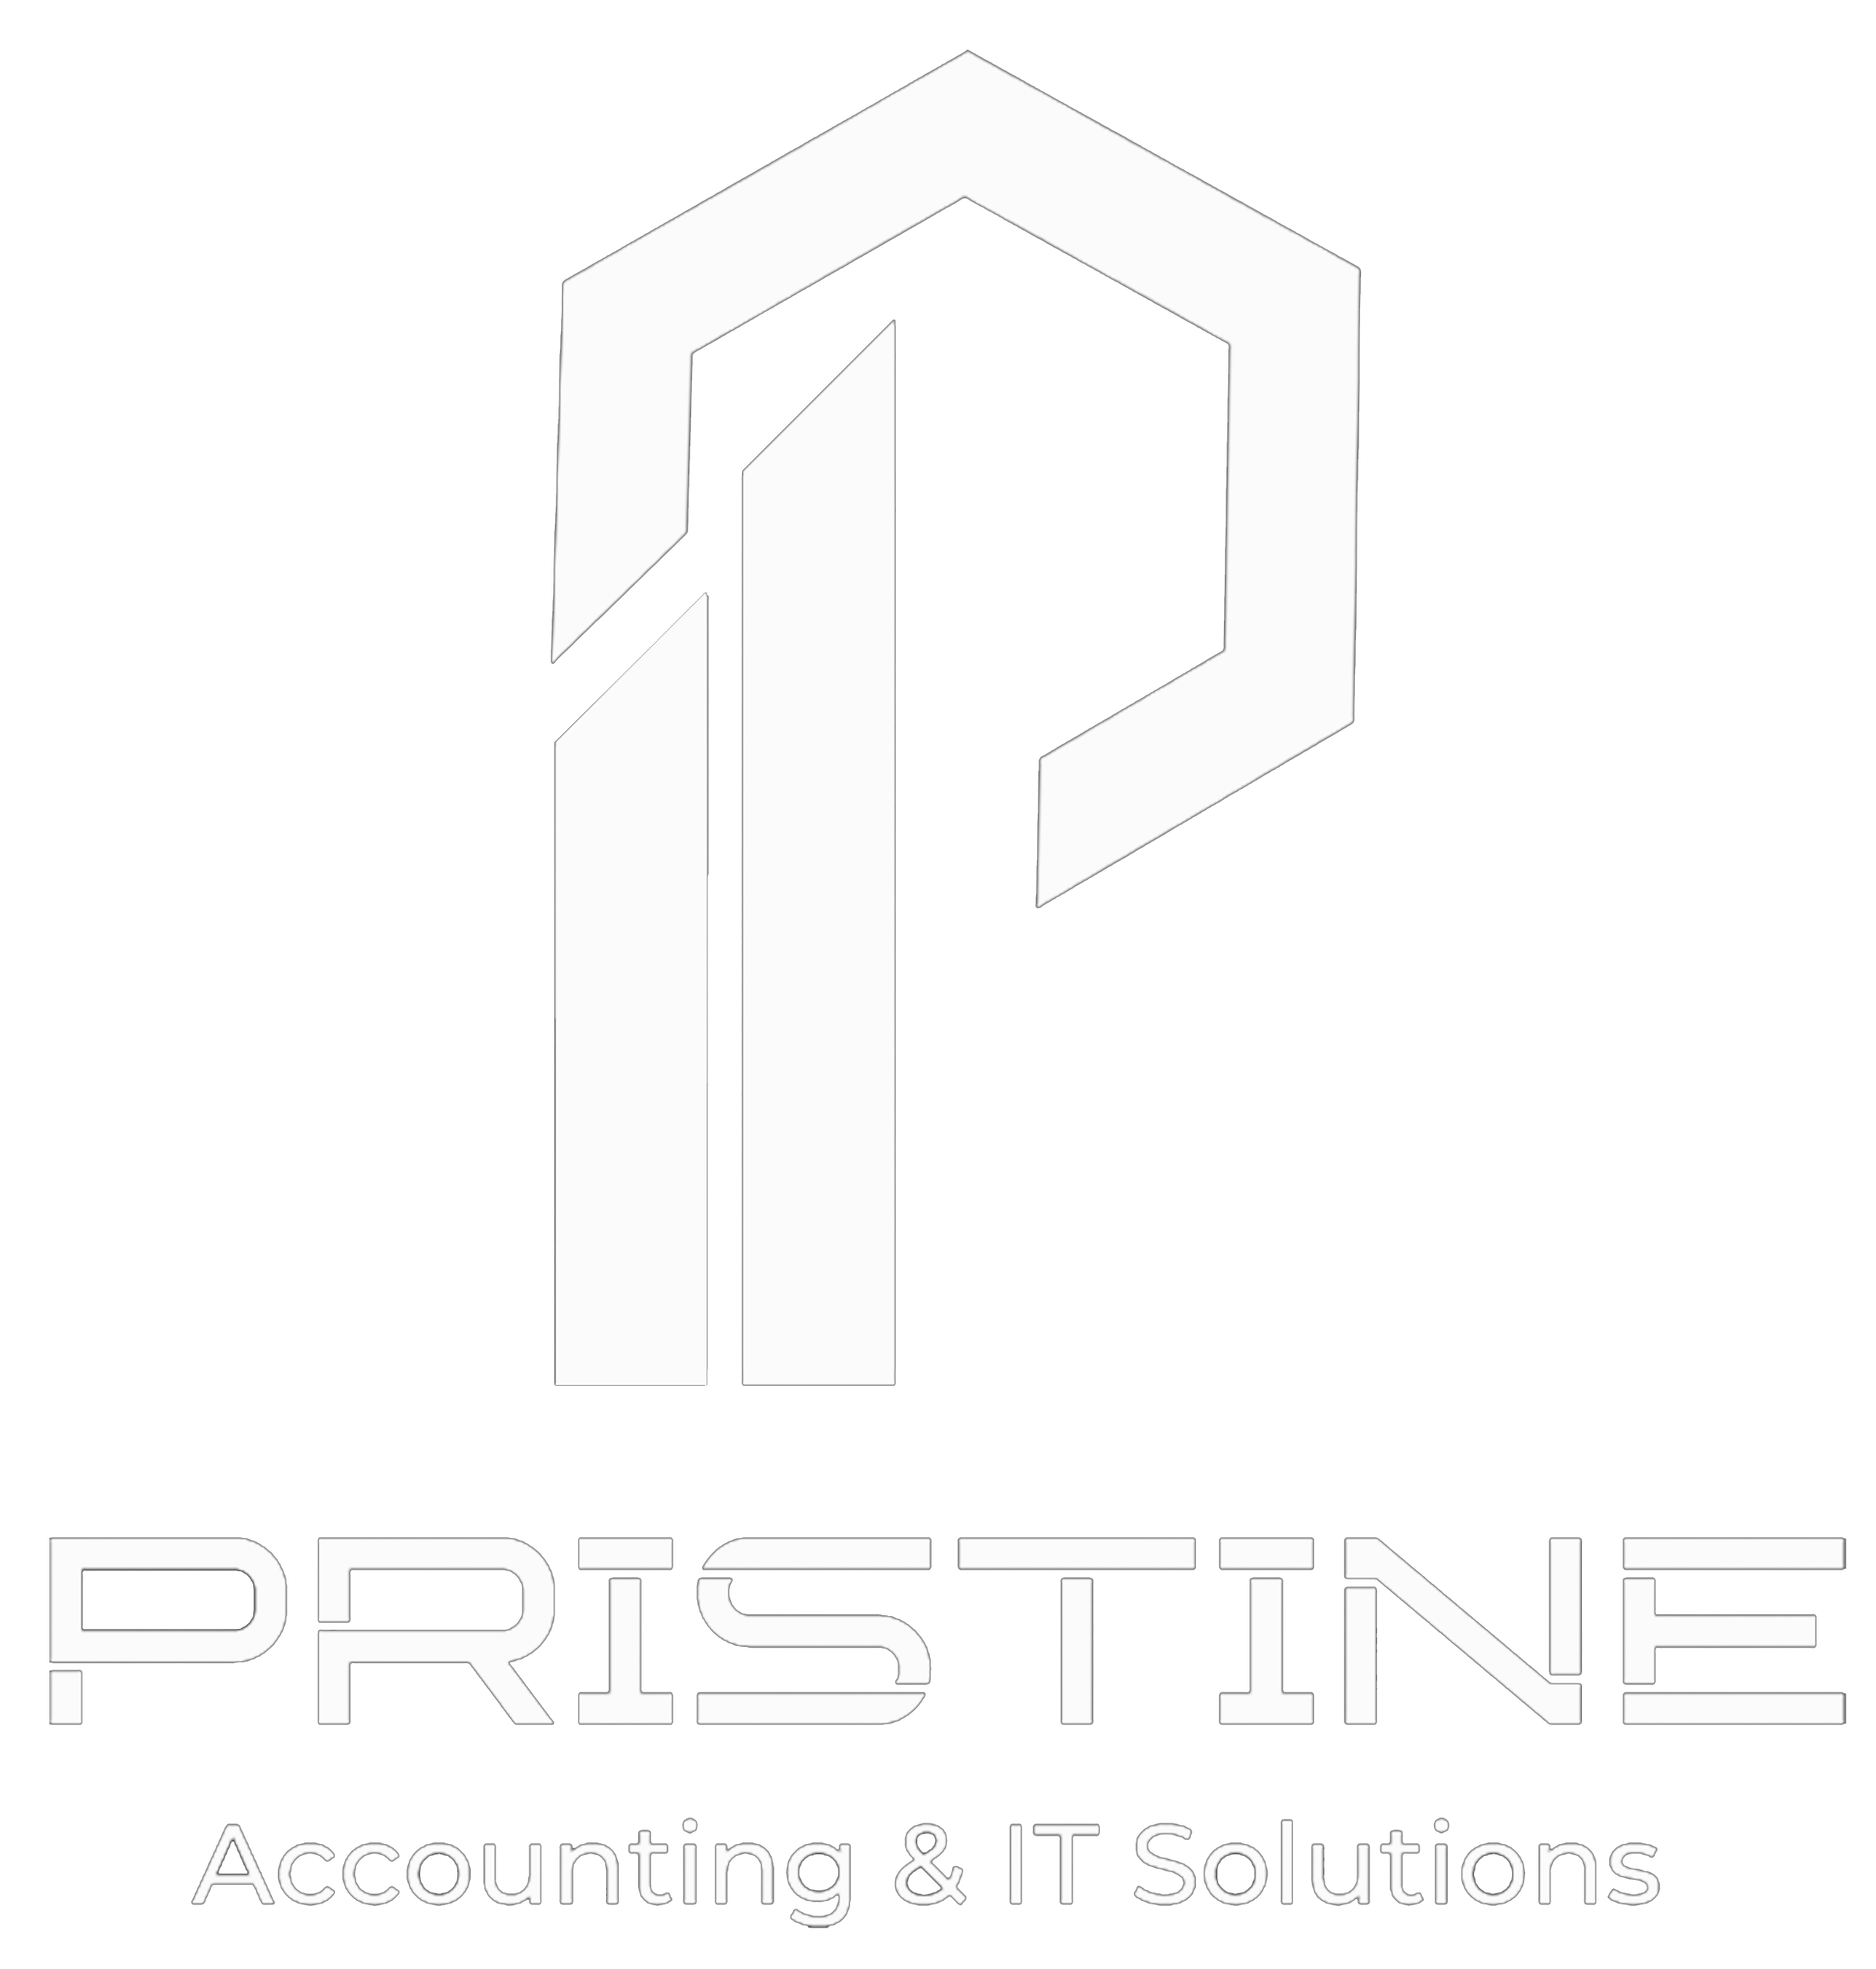 Pristine Accounting and IT Solutions